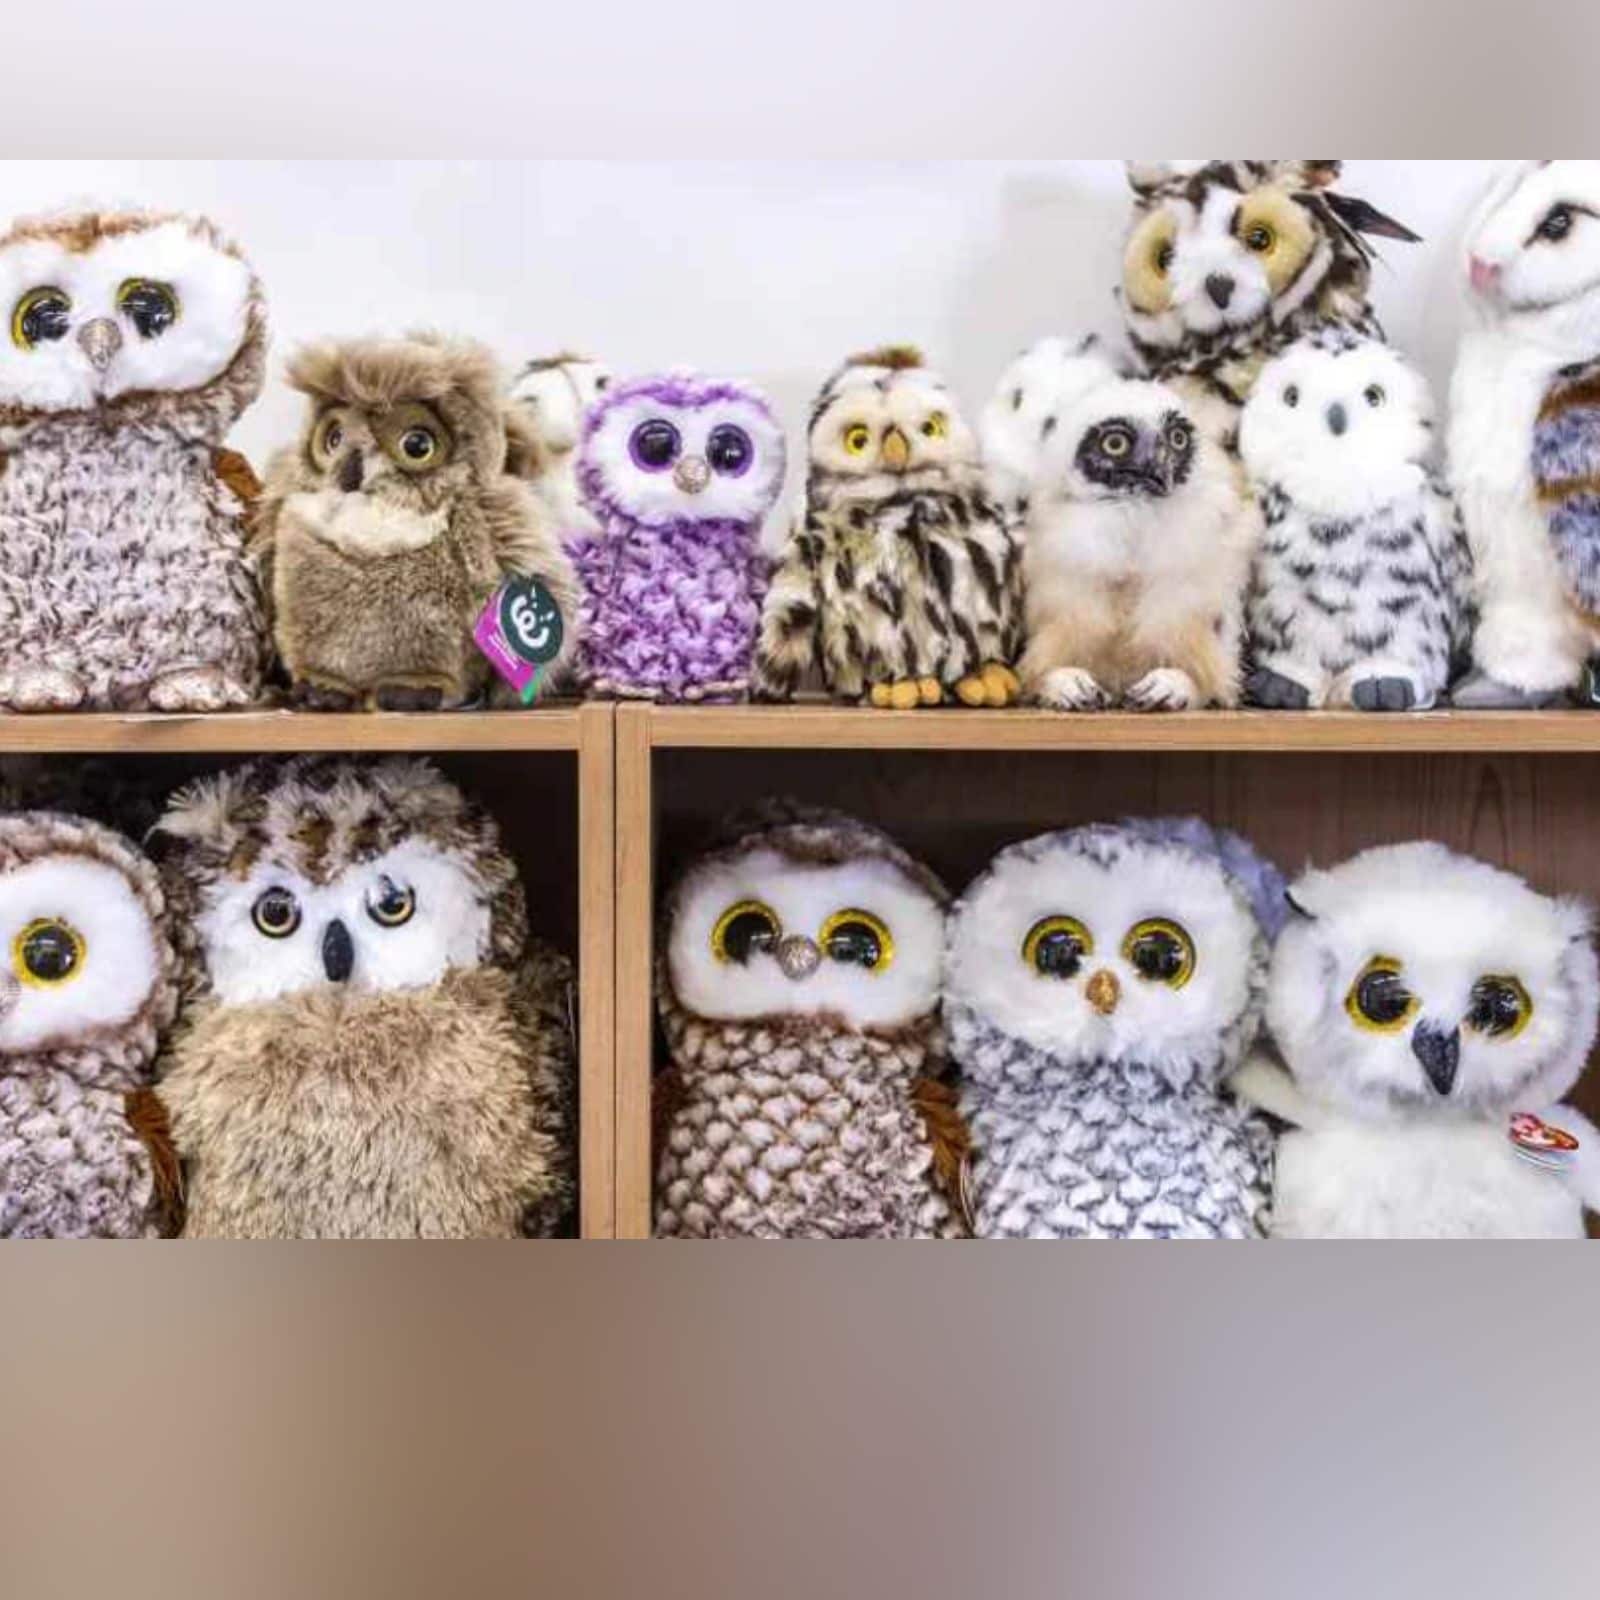 optical illusion between fake and real owl the challenge of identifying real owl among the toys